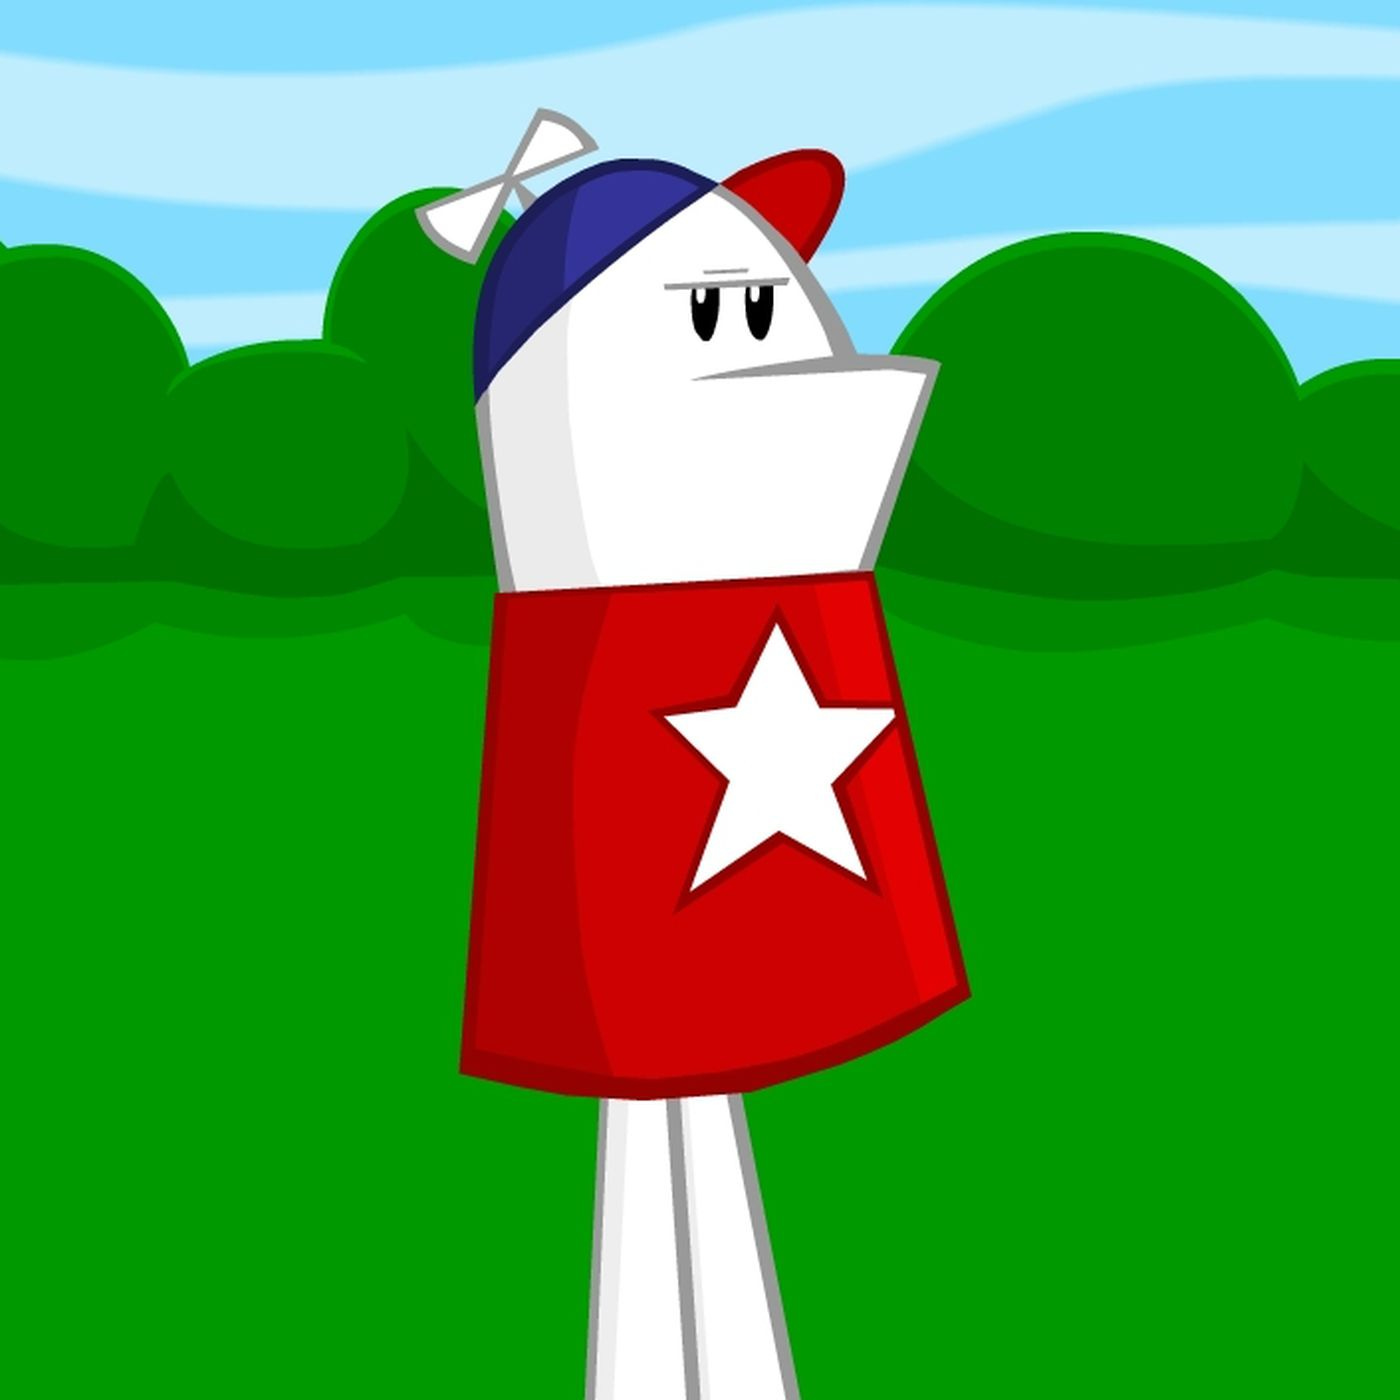 Homestar Runner was the greatest web cartoon ever, and it's back - Vox